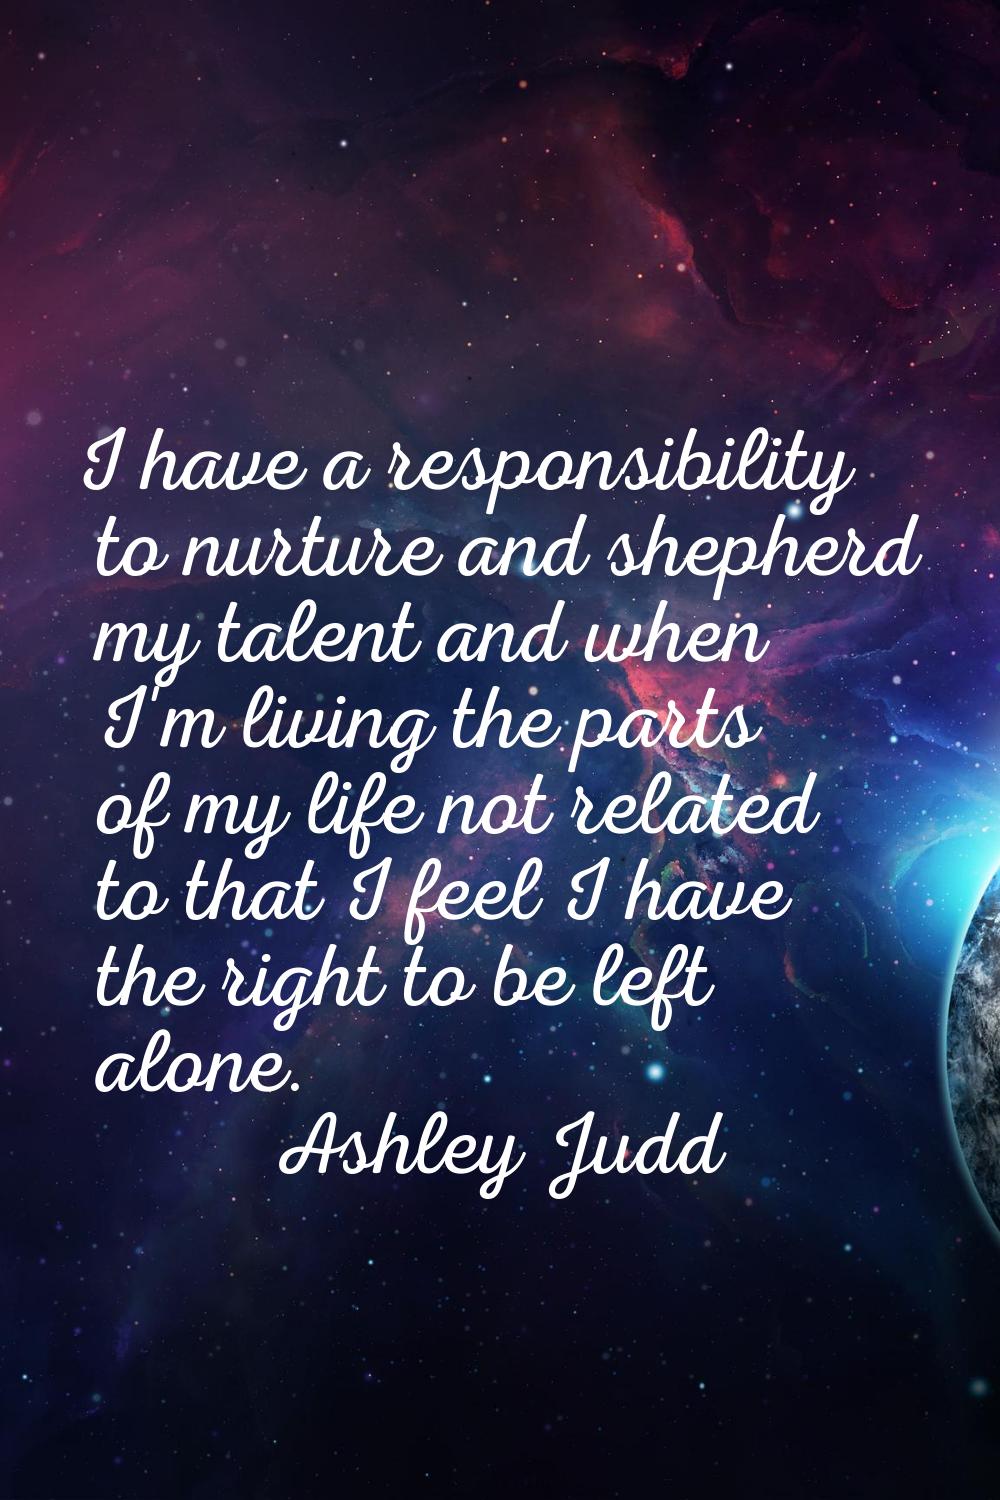 I have a responsibility to nurture and shepherd my talent and when I'm living the parts of my life 